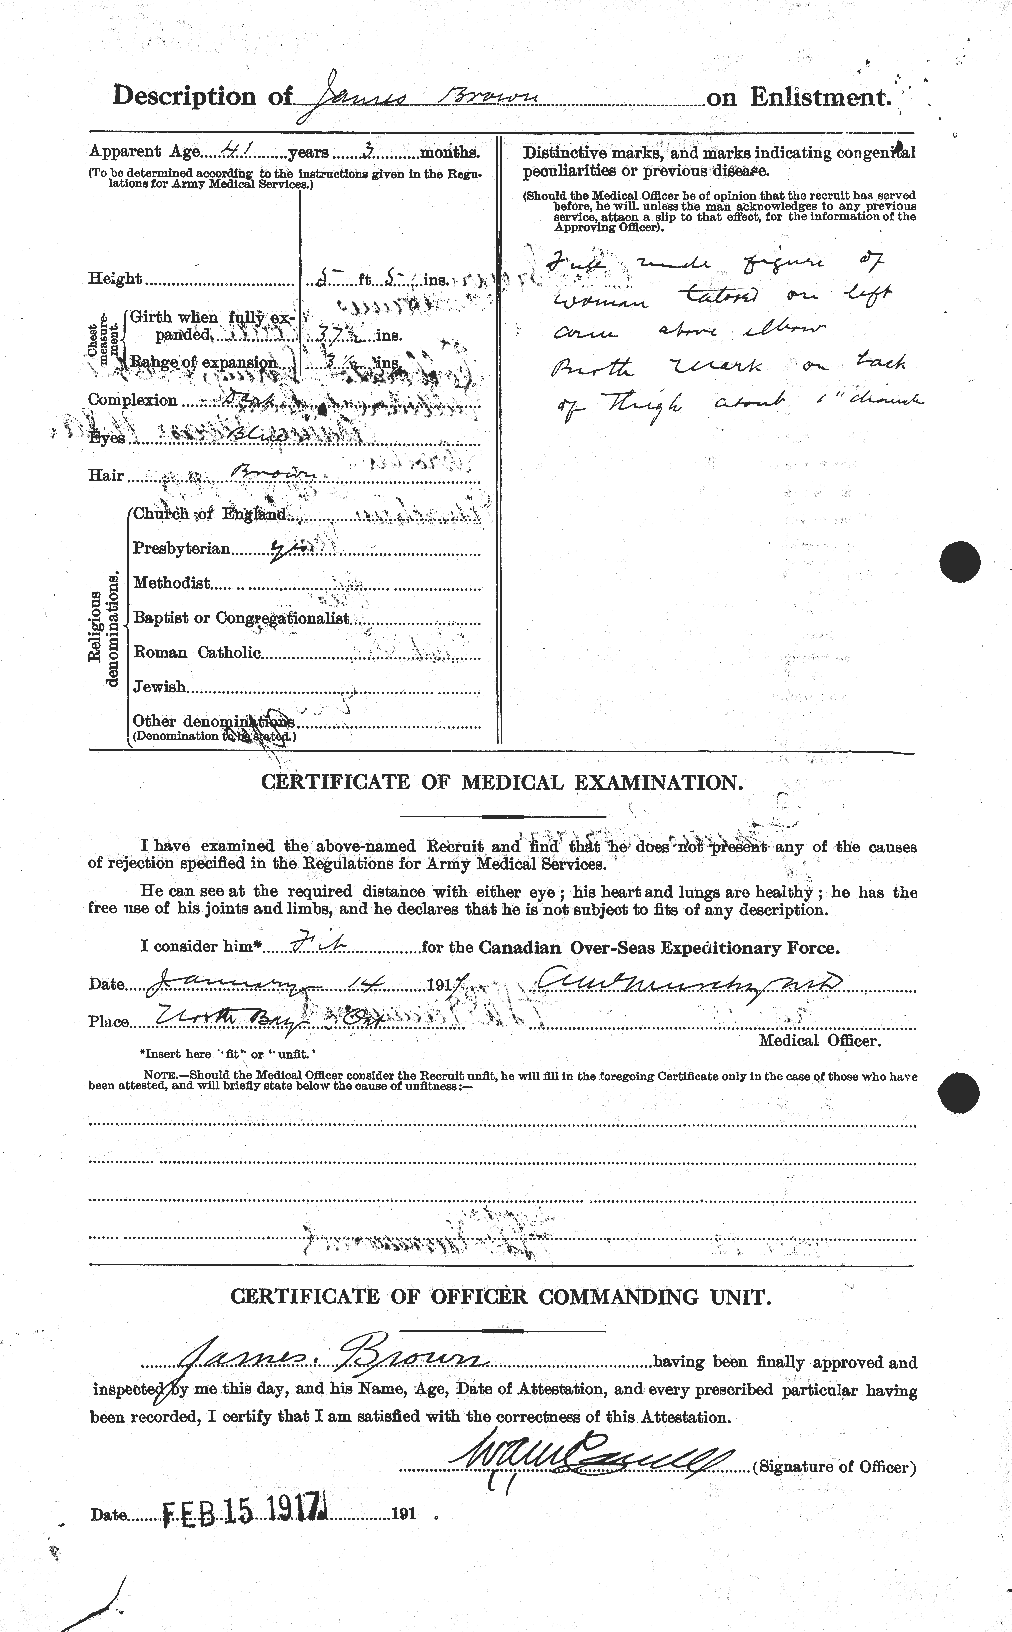 Personnel Records of the First World War - CEF 265738b